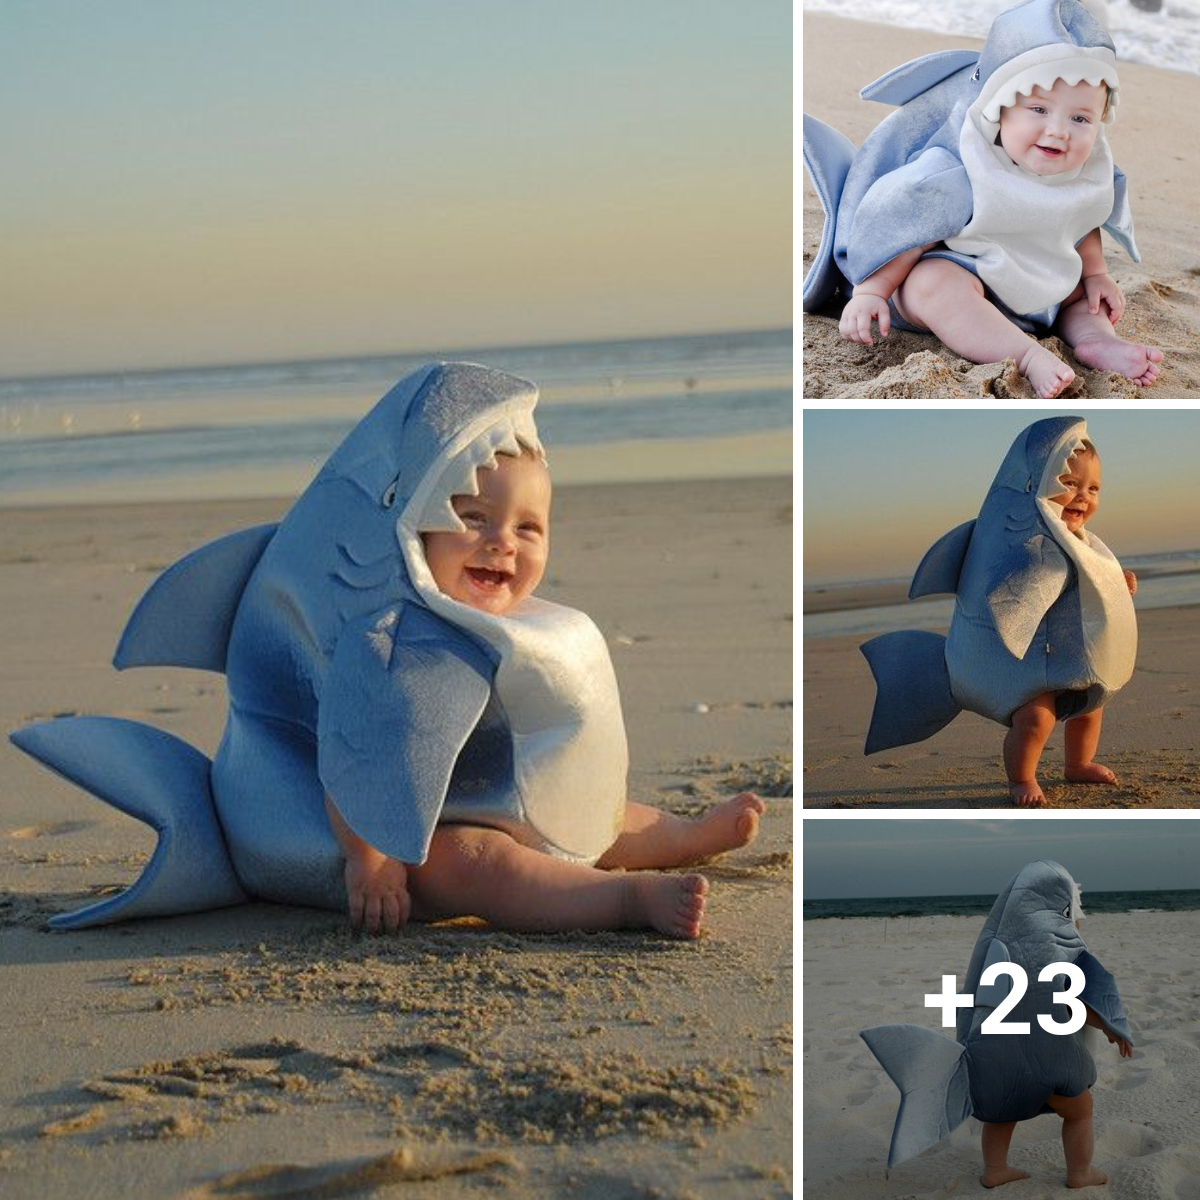 A lovable baby shark is making waves on social media. Too cute.